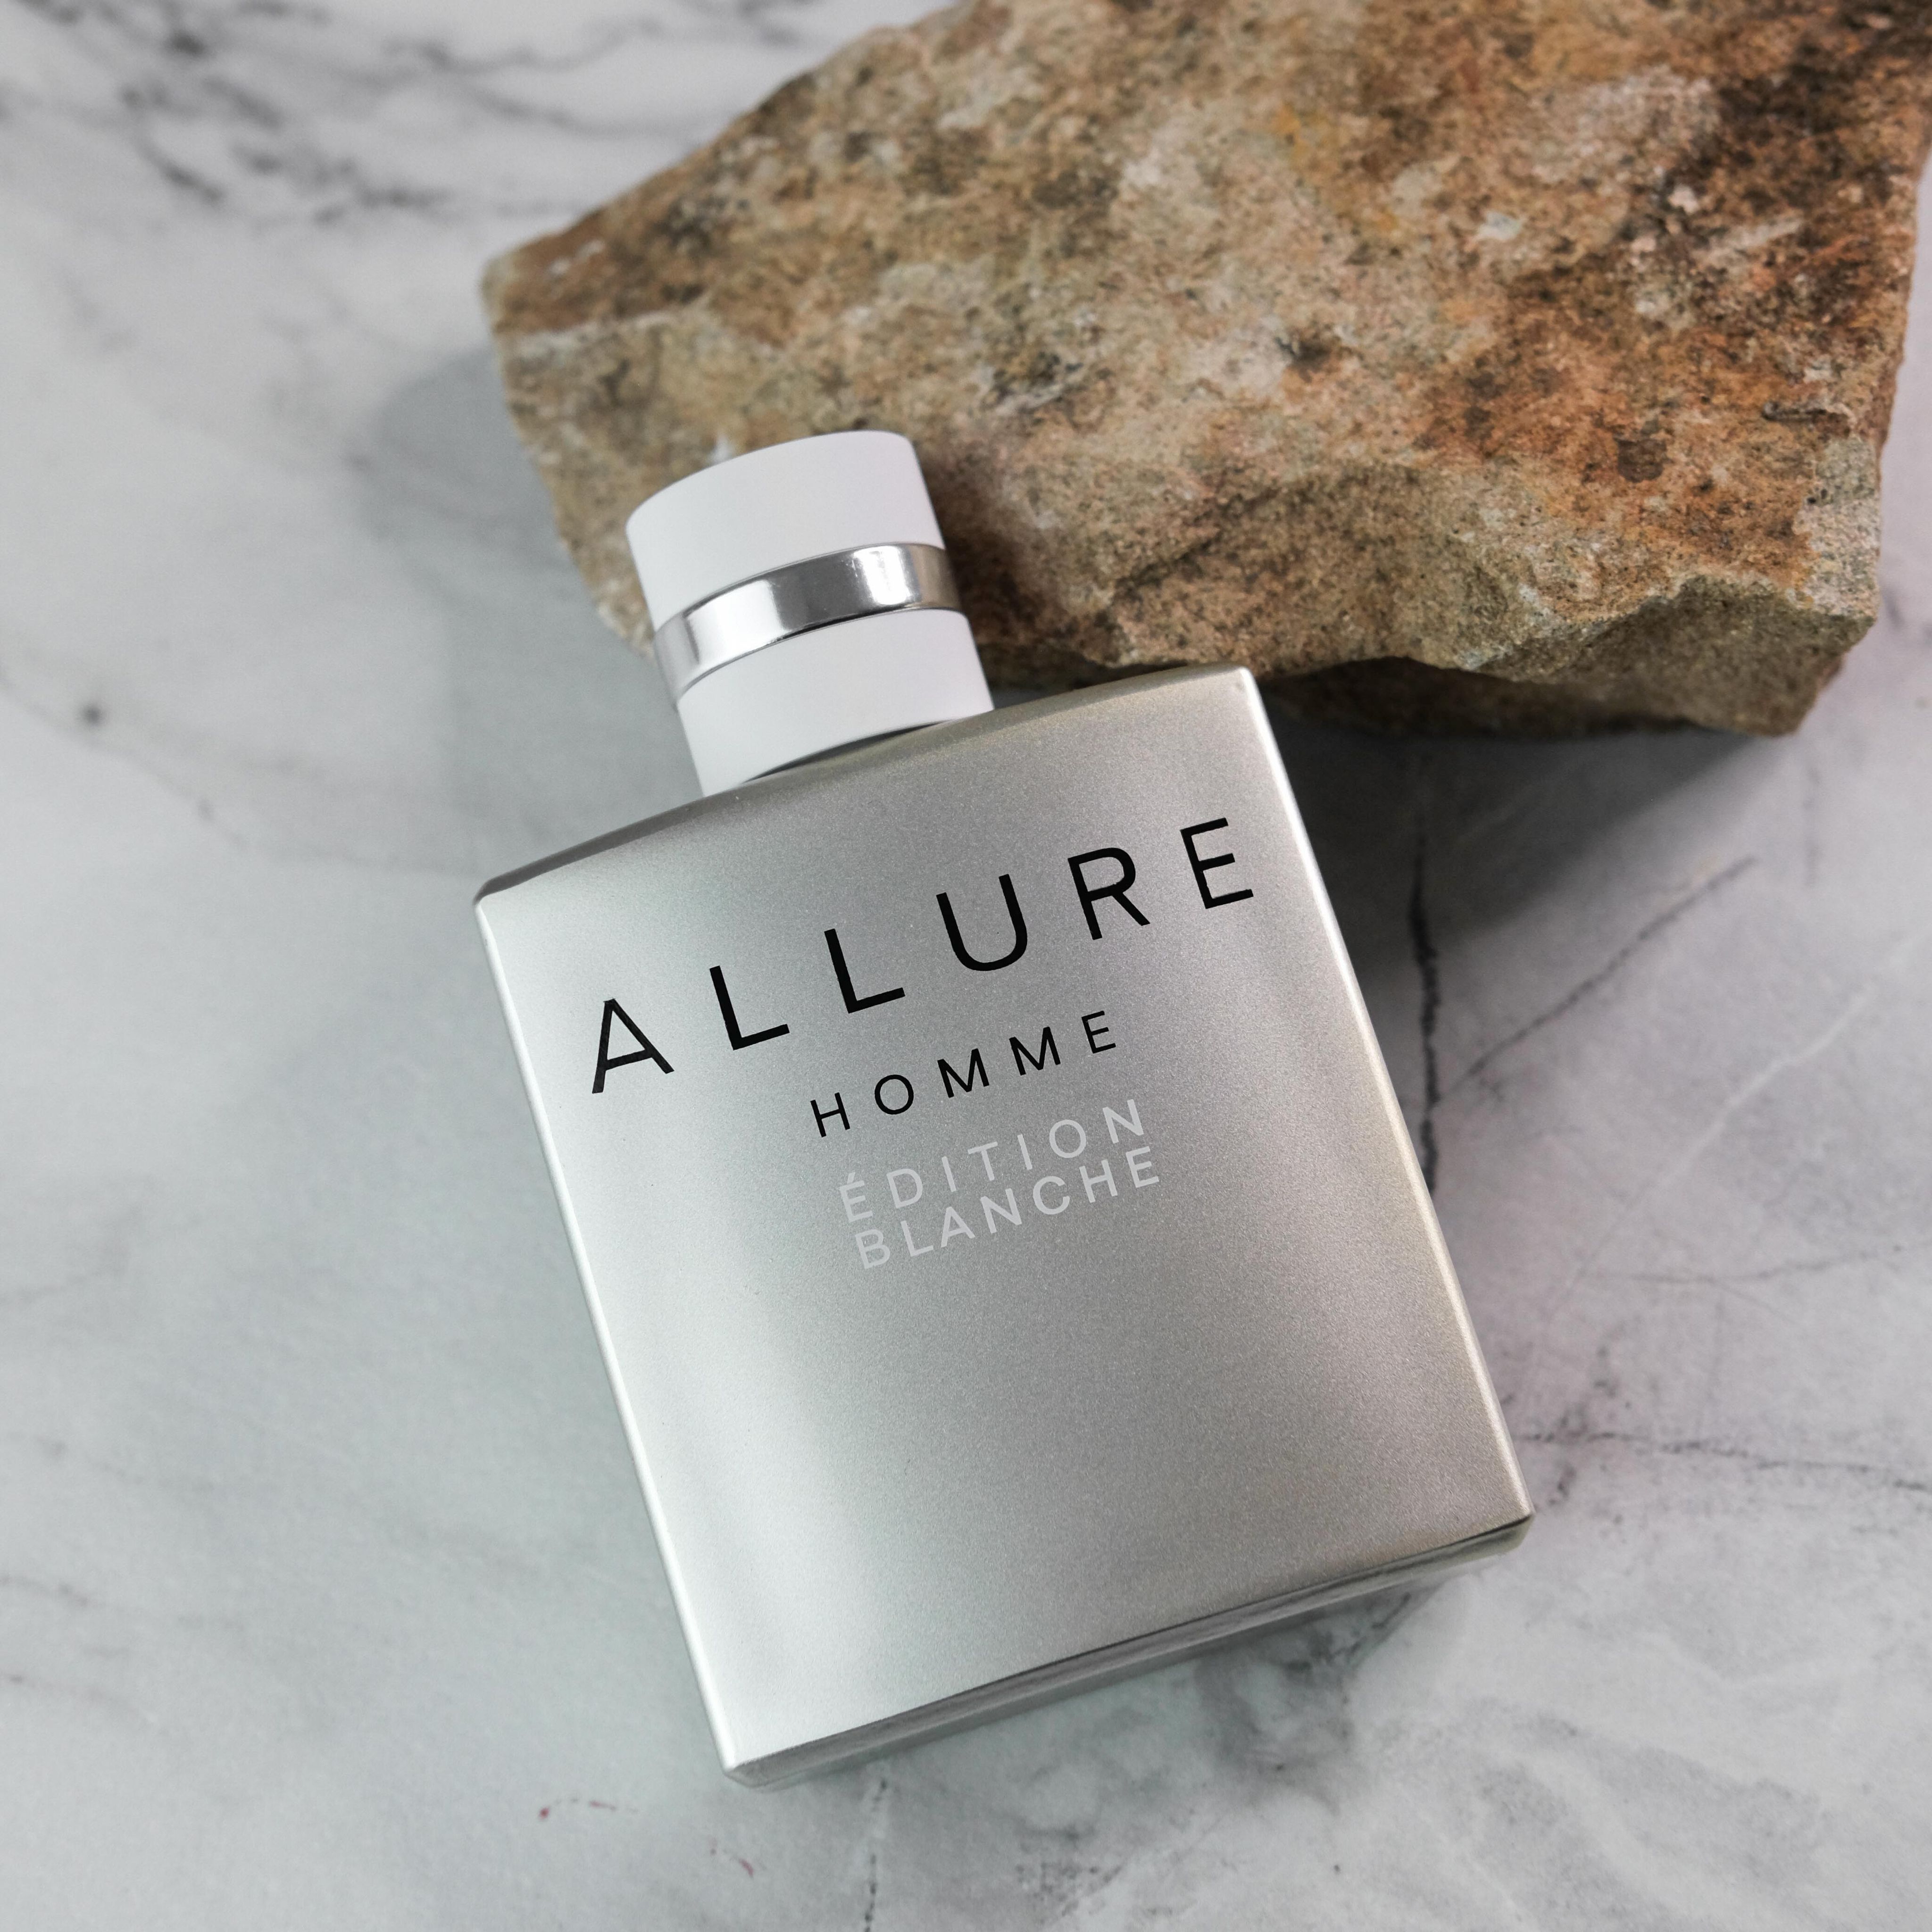 Chanel allure homme blanche. Chanel мужские. Allure homme Edition Blanche 150ml. Chanel мужс. Allure homme Edition Blanche 150 ml. Chanel мужские. Allure homme Edition Blanche. Chanel Allure Edition Blance.